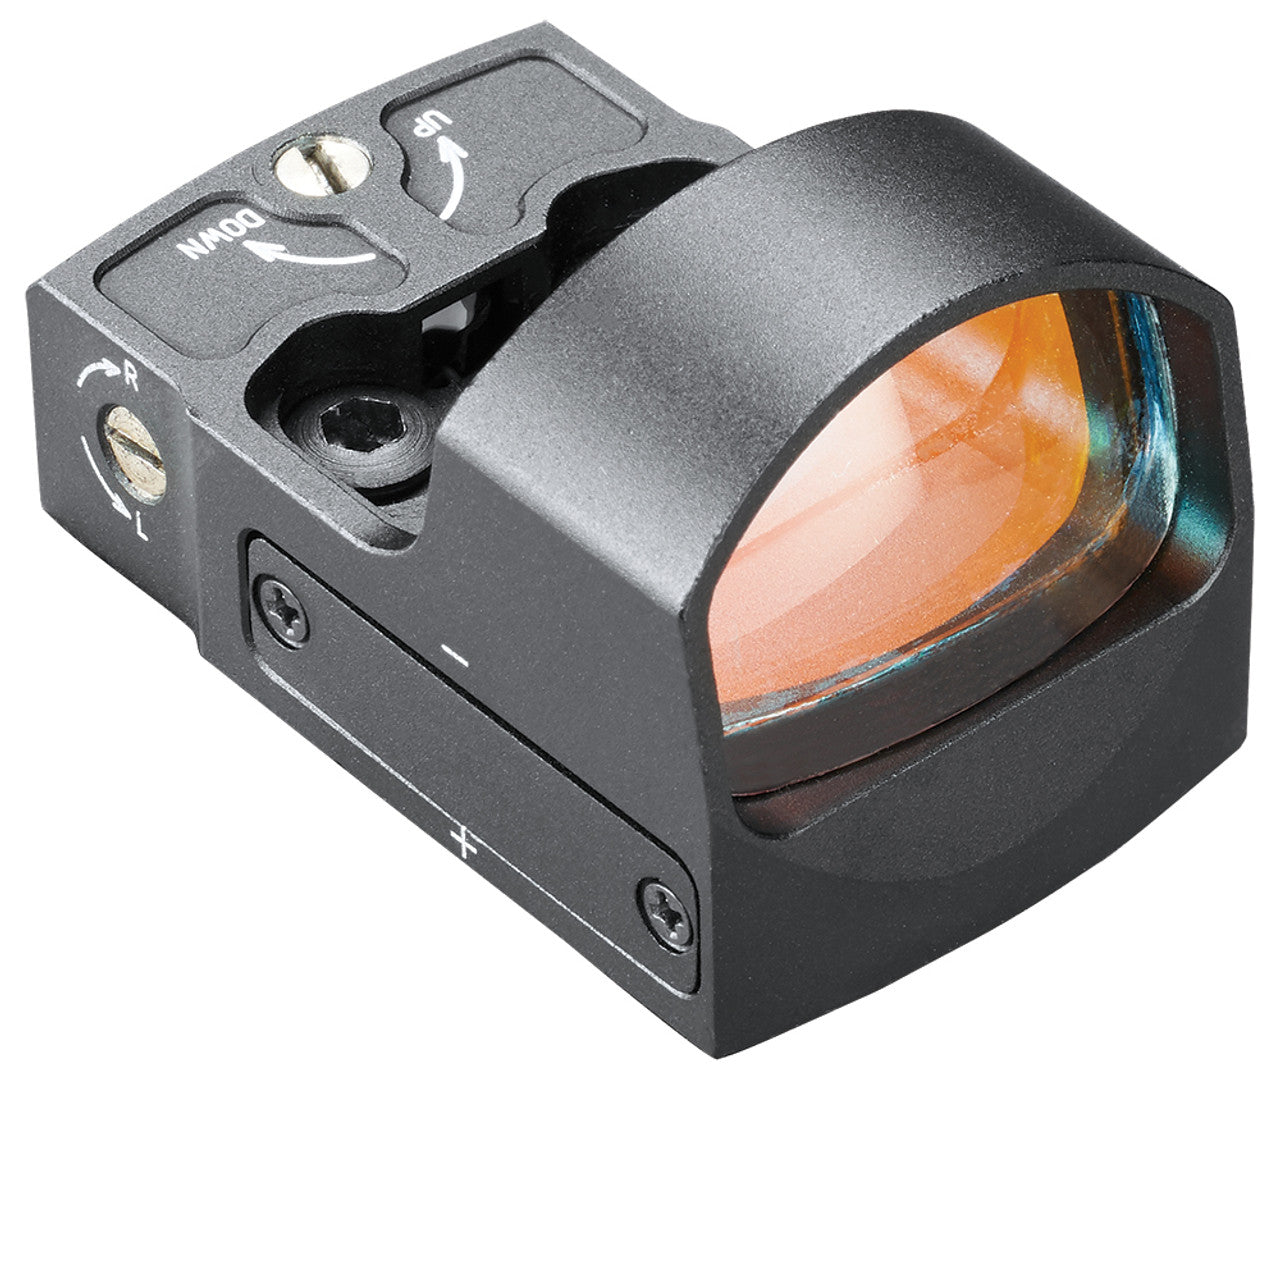 Propoint 1x25 Reflex Sight 4MOA -  - Mansfield Hunting & Fishing - Products to prepare for Corona Virus